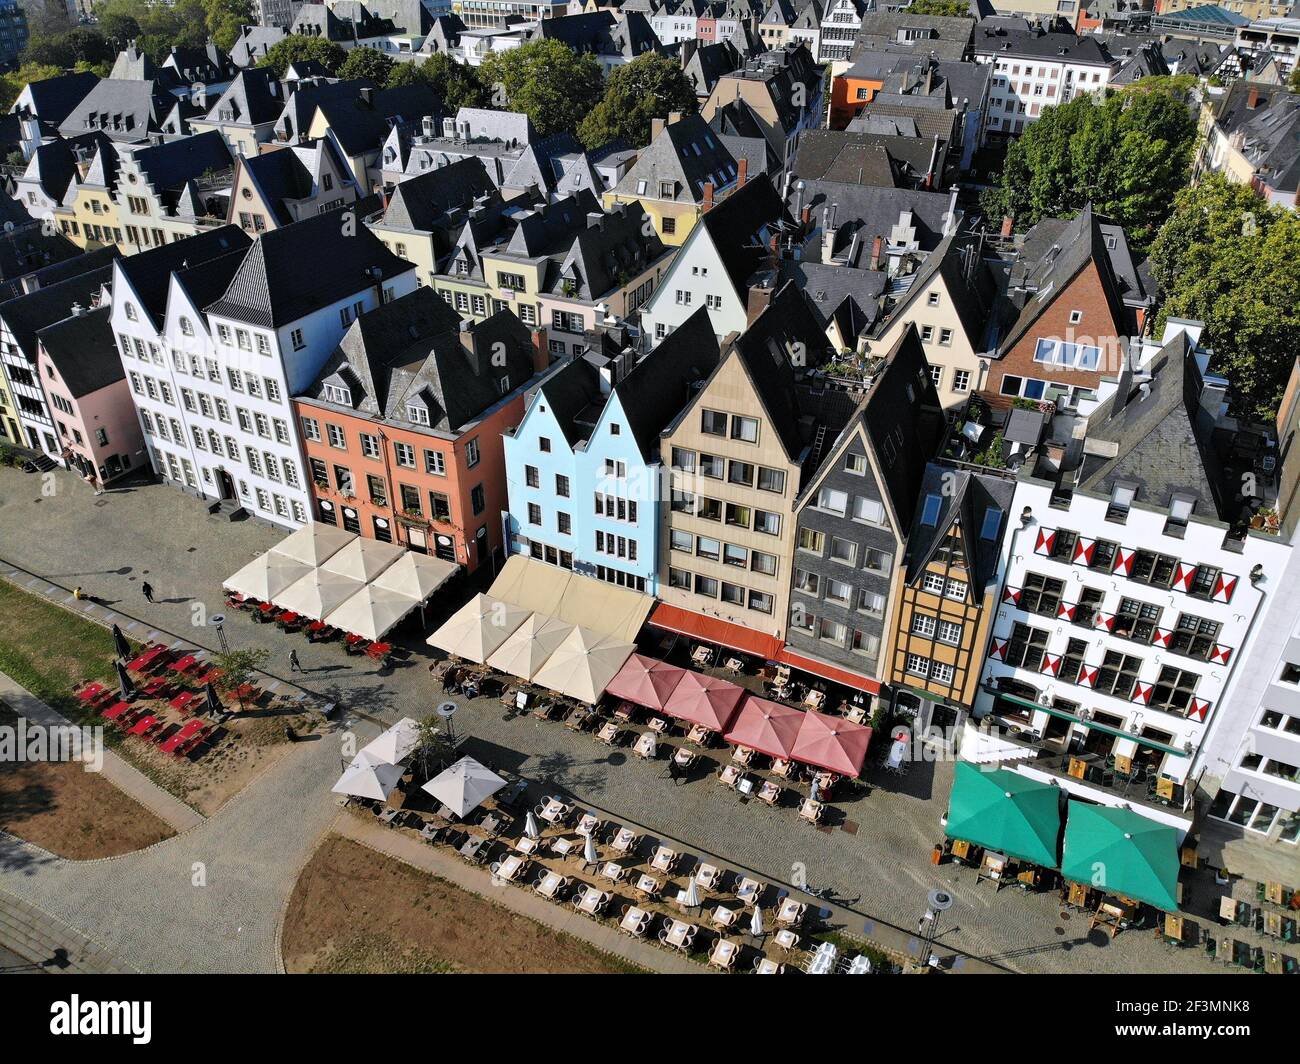 Cologne city, Germany. Colorful aerial view of Innenstadt part of Altstadt district, Cologne city. Stock Photo